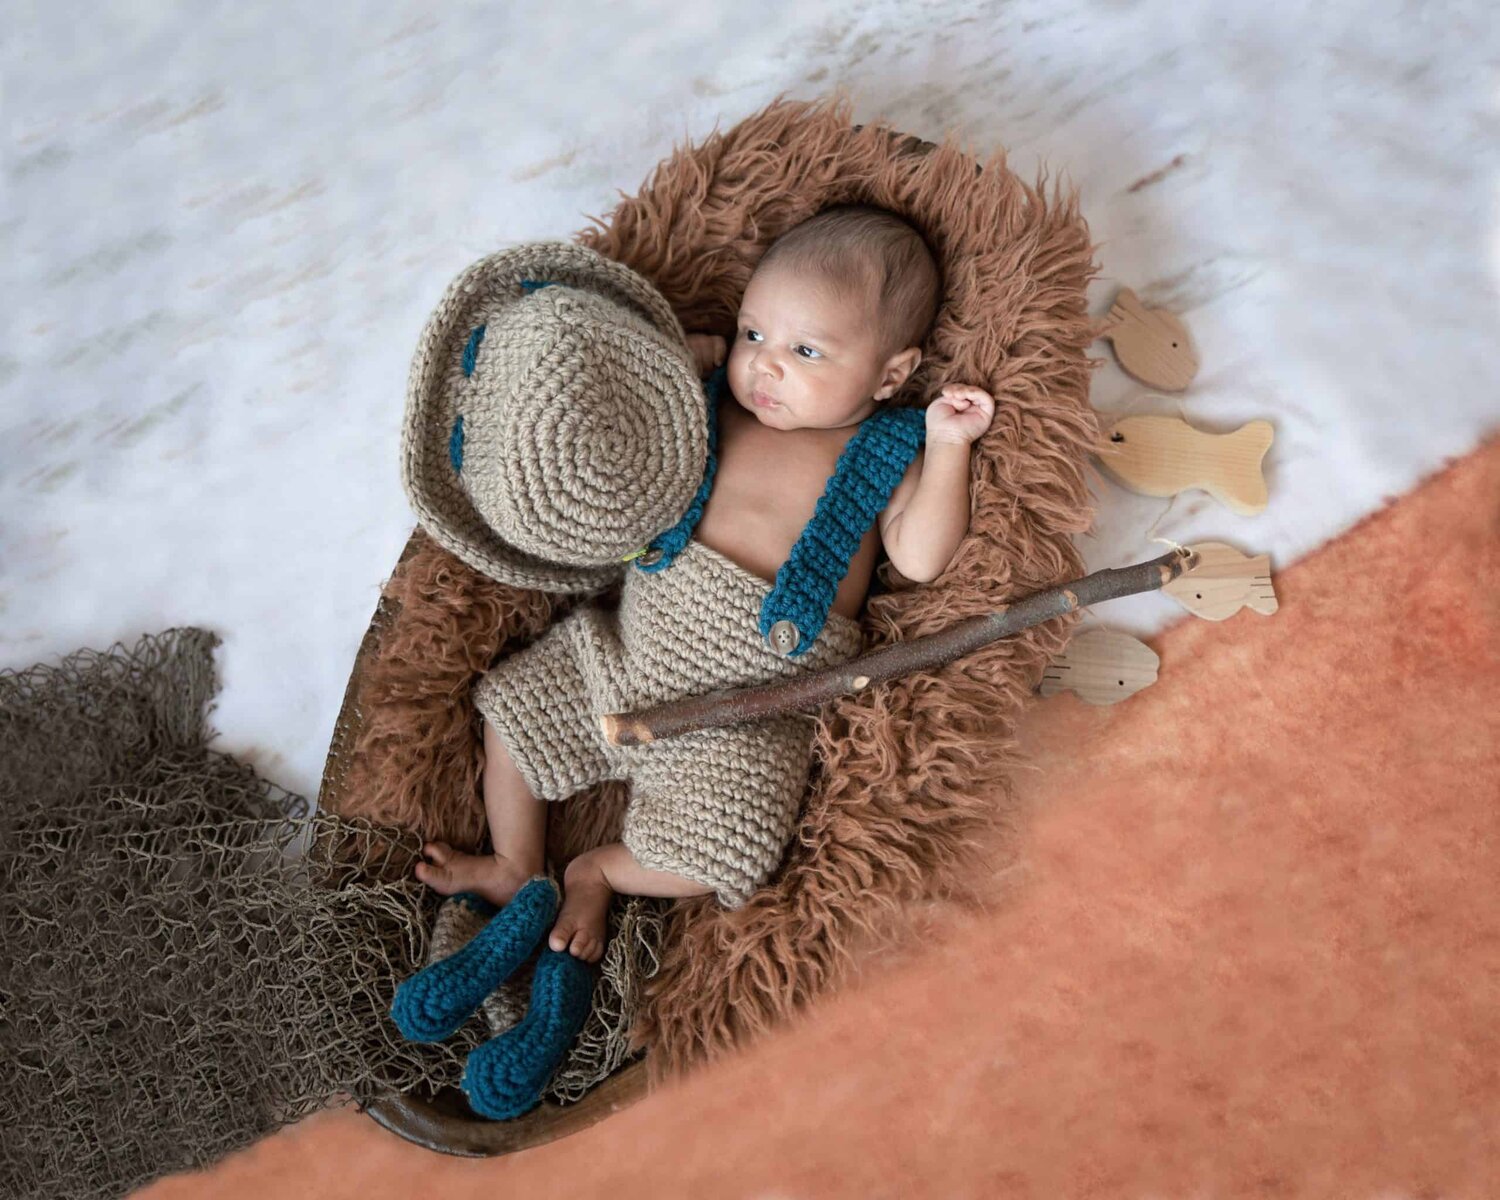 One month new baby boy in fisherman outfits with fish net and fish sticks - www.musenphotos.com - in-home newborn session - central New Jersey